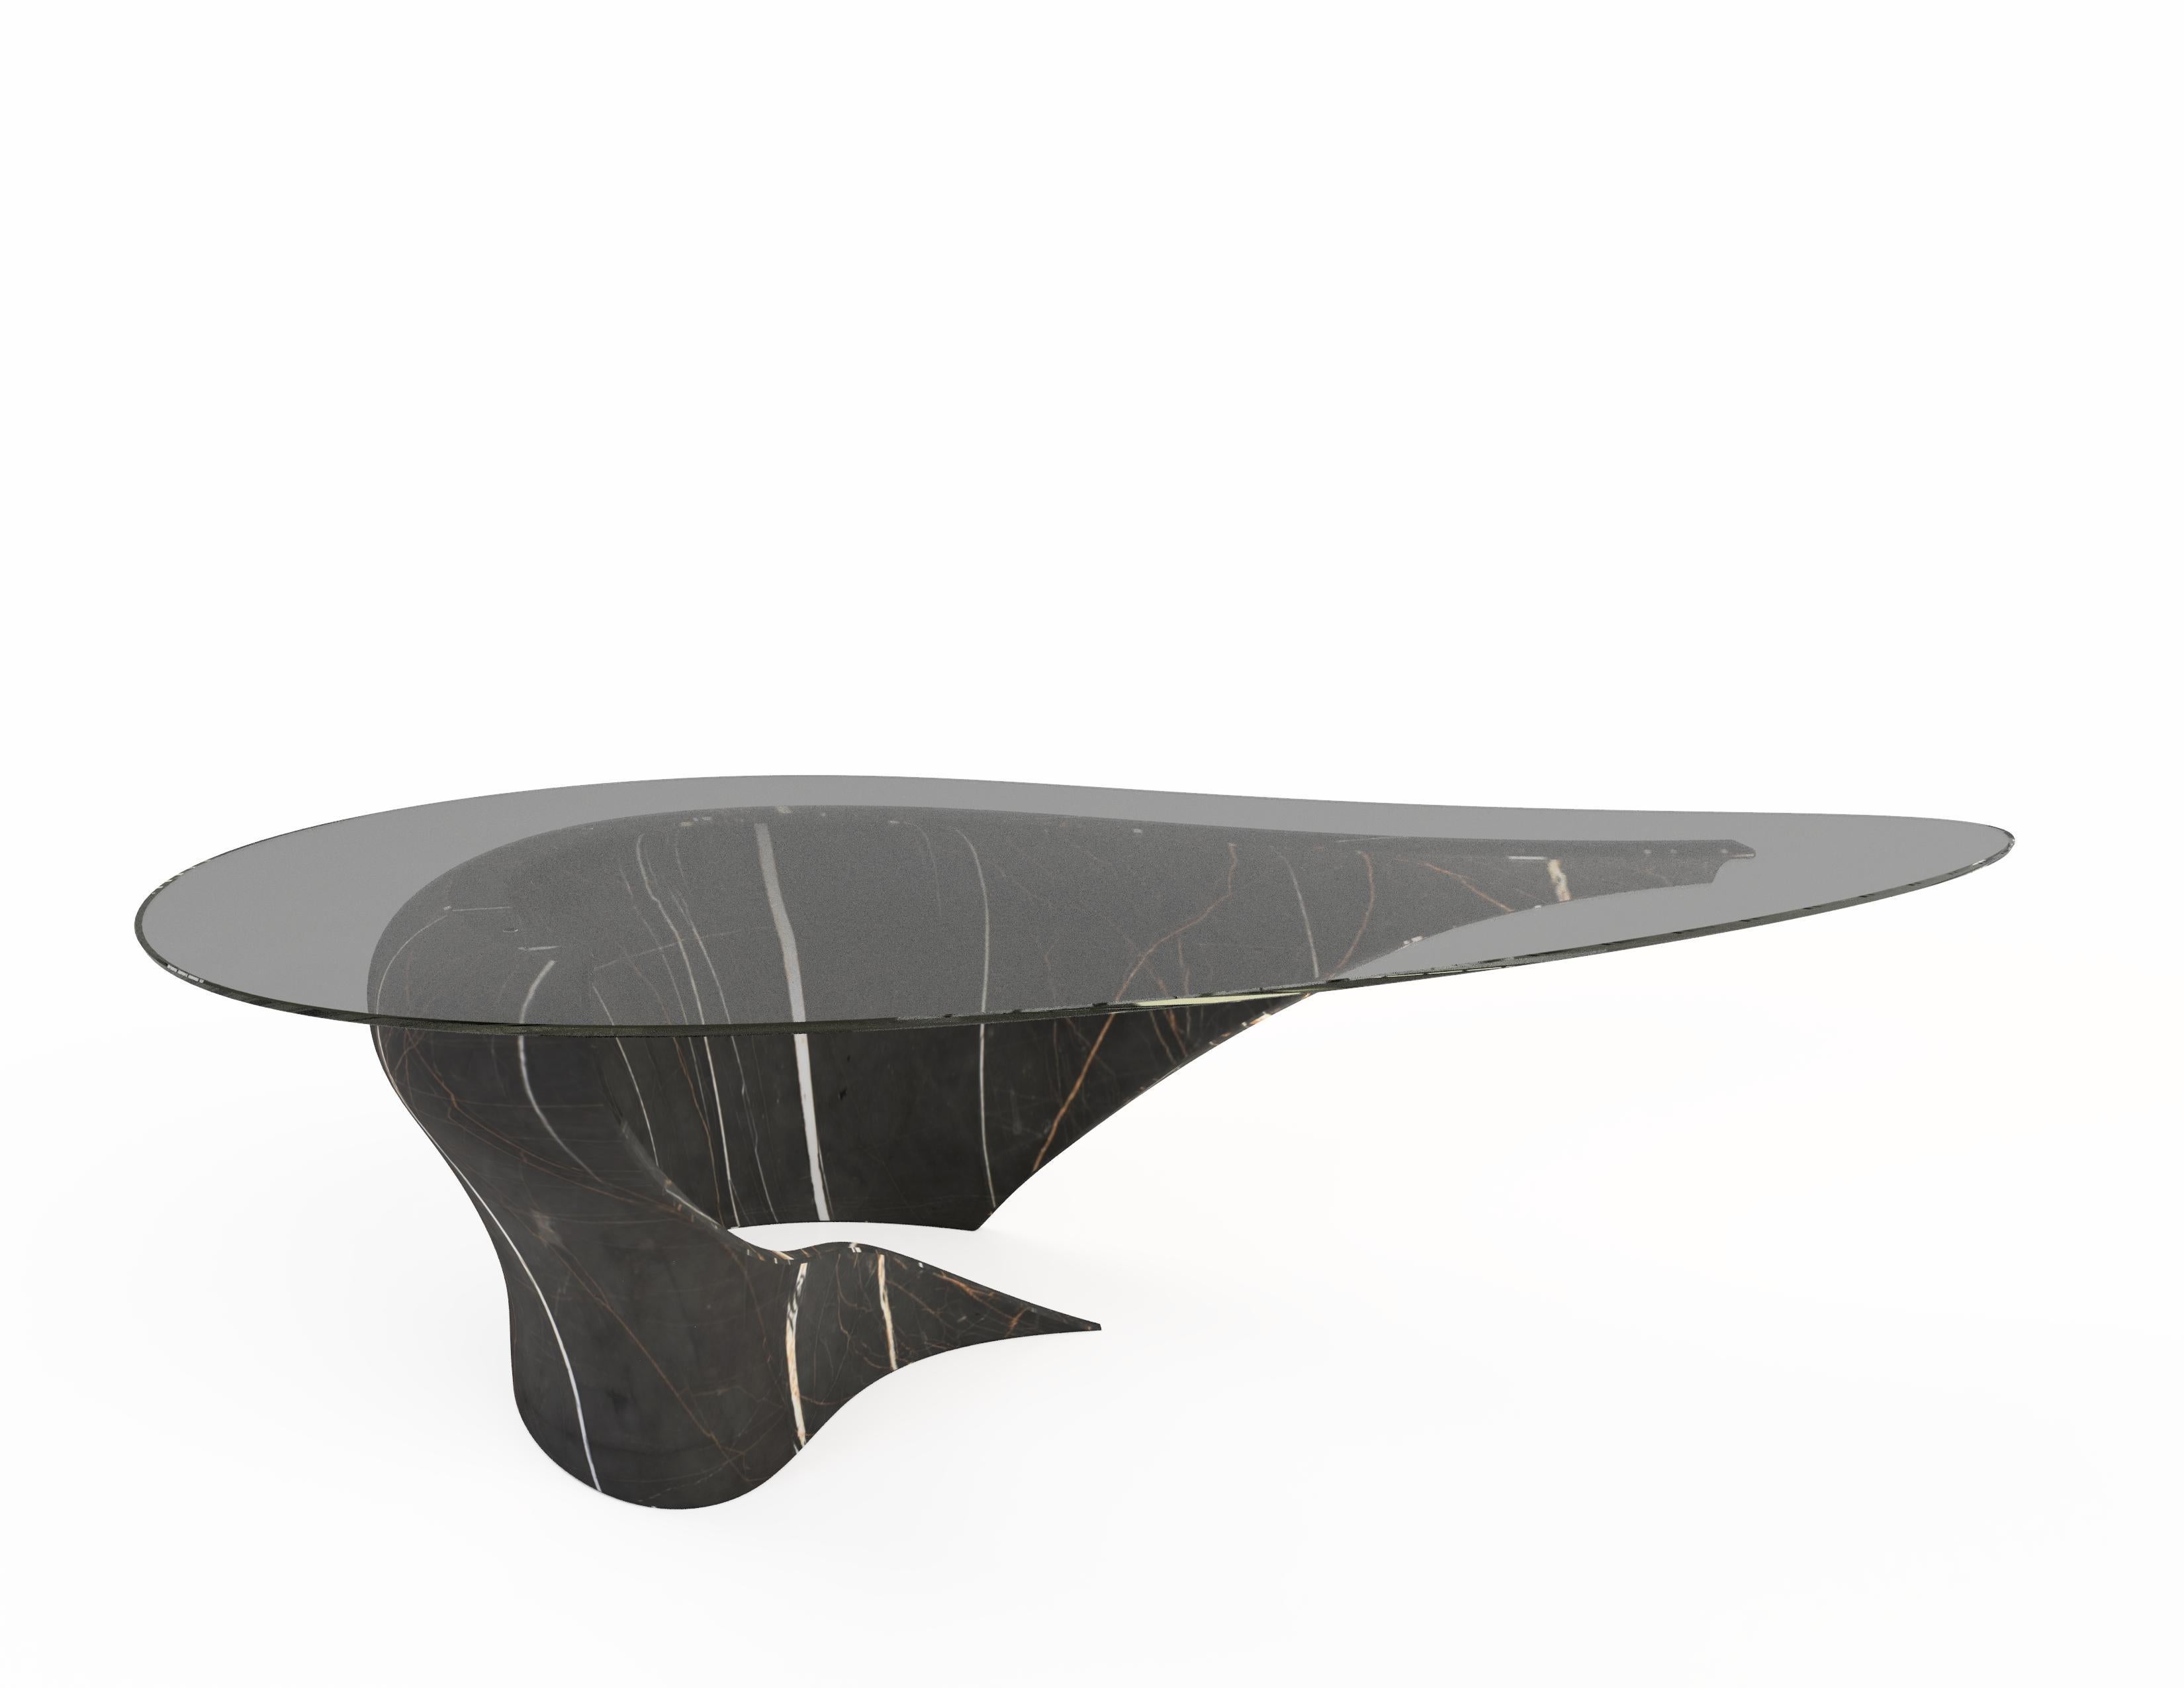 The diamond G center table, 1 of 1 by Grzegorz Majka
Edition 1 of 1
Dimensions: 70.87 x 43.31 x 18.11 in
Materials: smoked glass top. Onyx base. 


The Diamond collection proves that everything is possible. It goes beyond the stereotypical